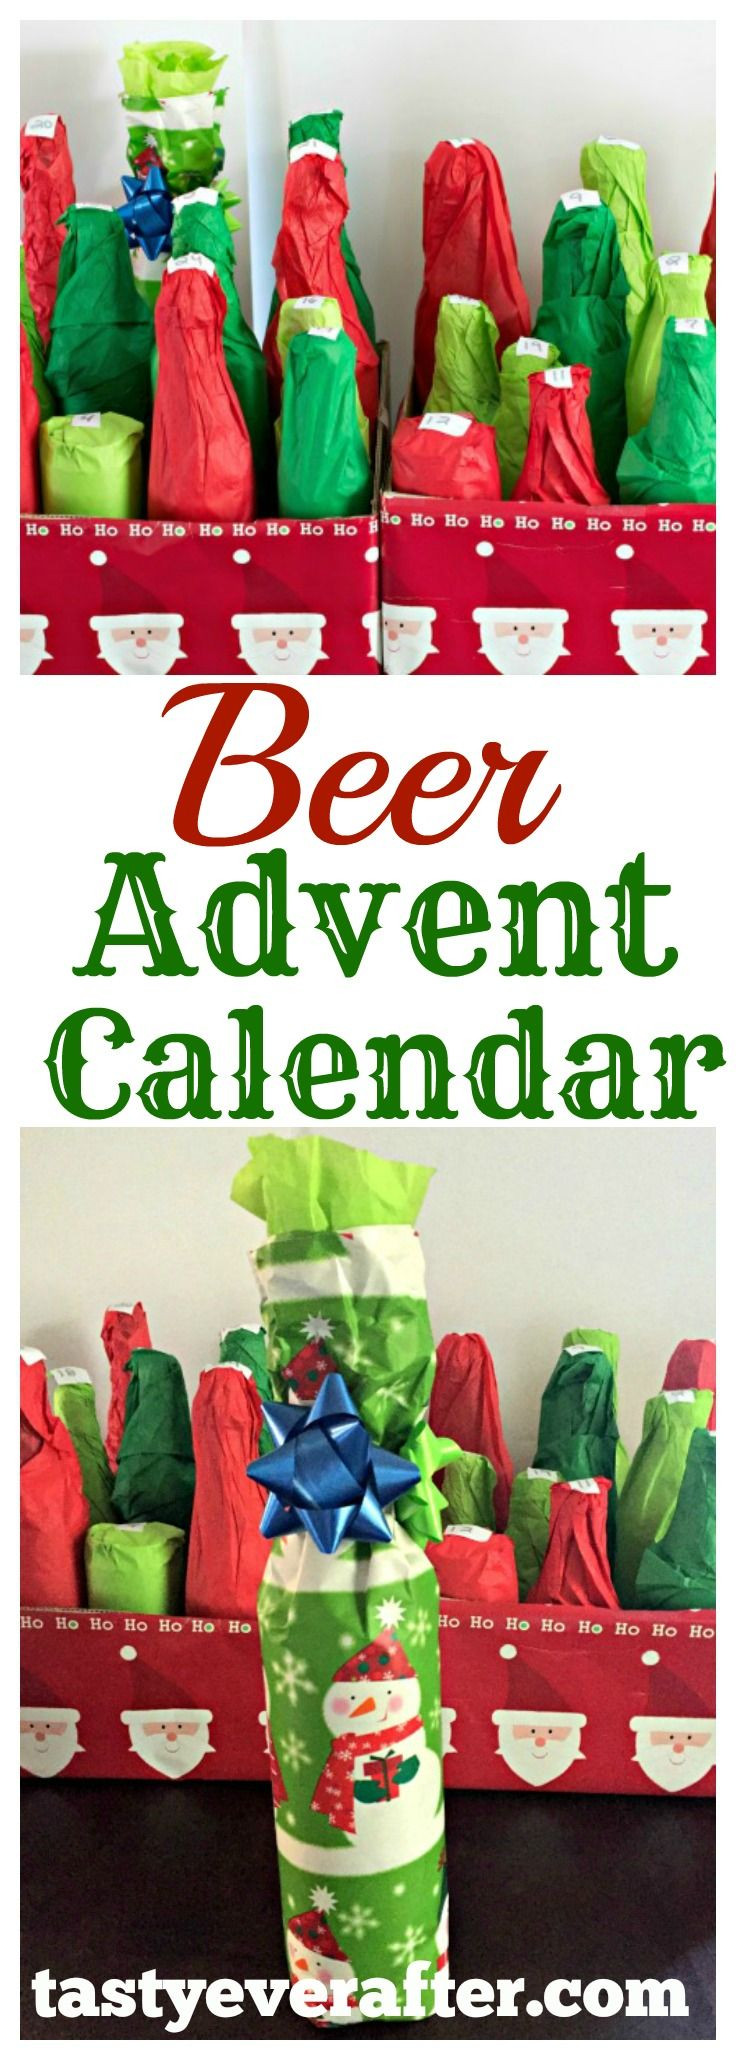 25 Days Of Christmas Gift Ideas For Boyfriend
 1000 ideas about Beer Gifts on Pinterest